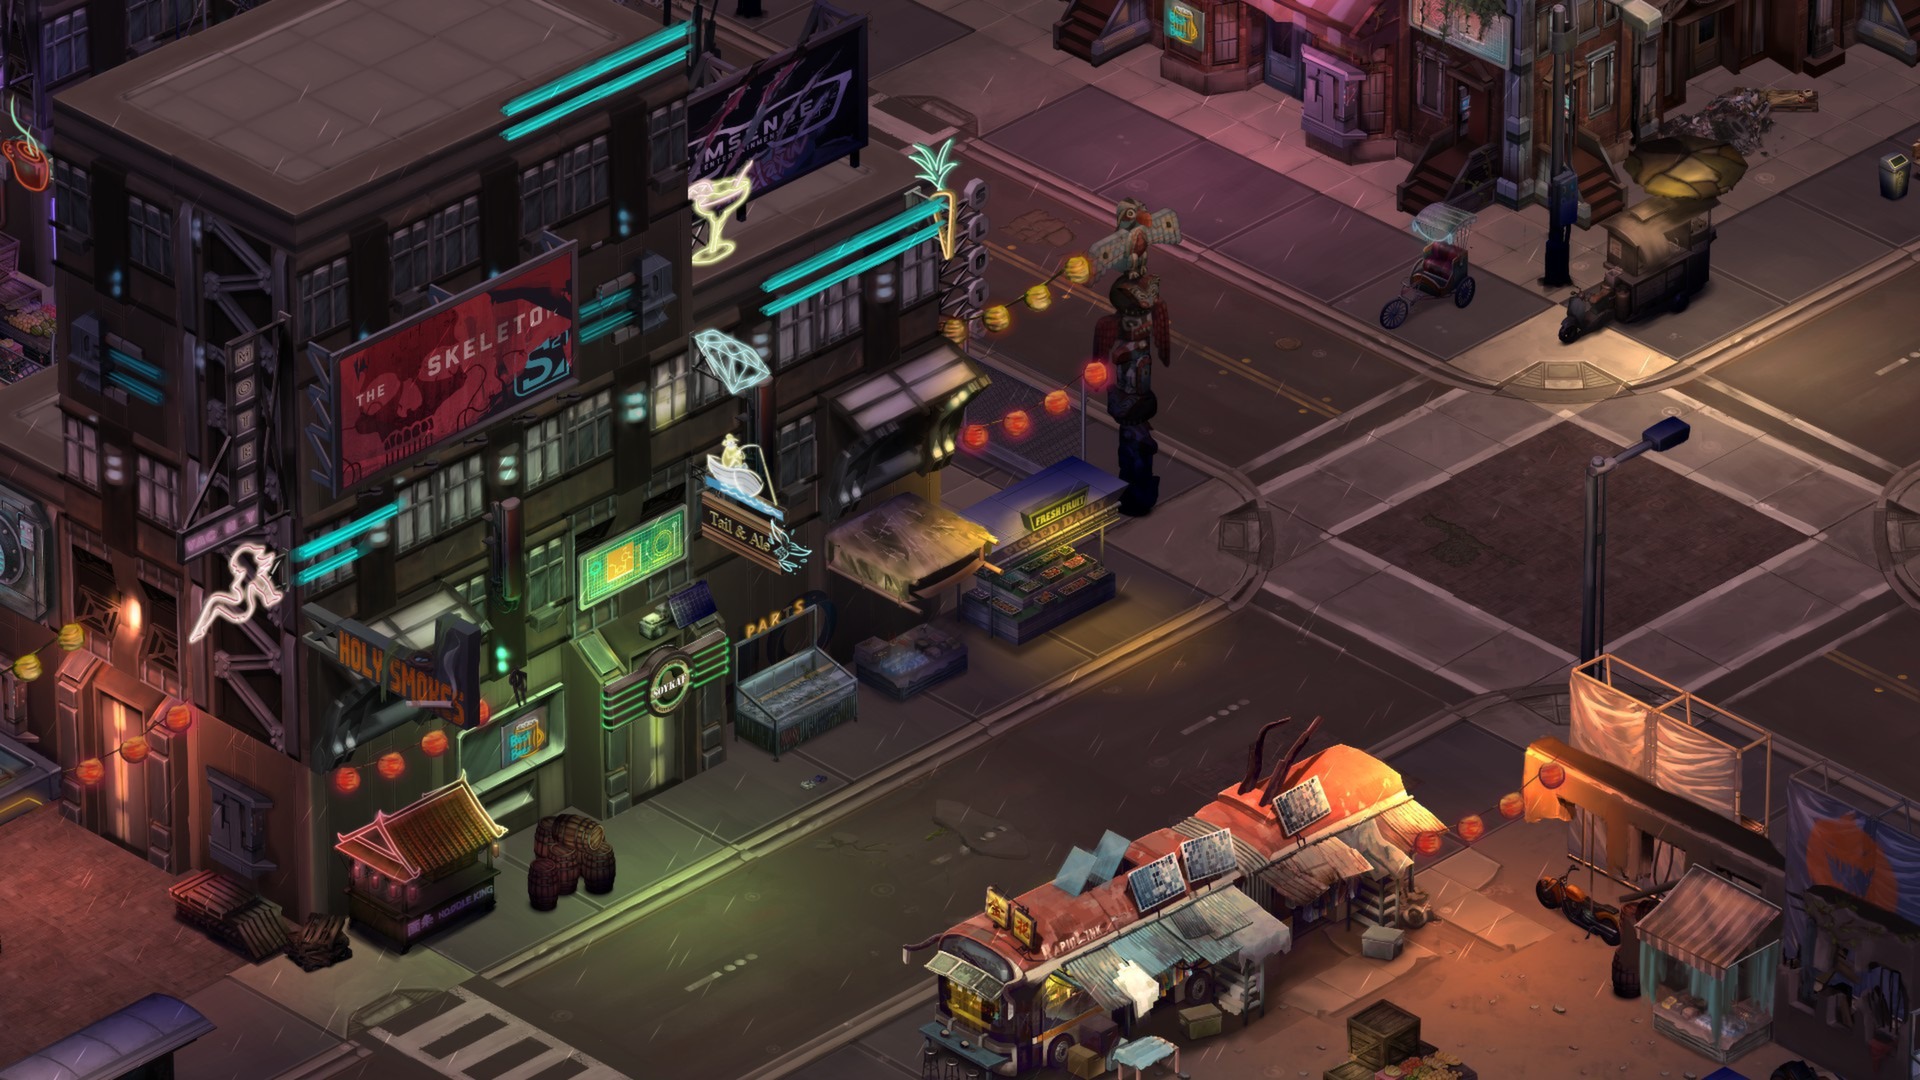 Buy Shadowrun Trilogy from the Humble Store